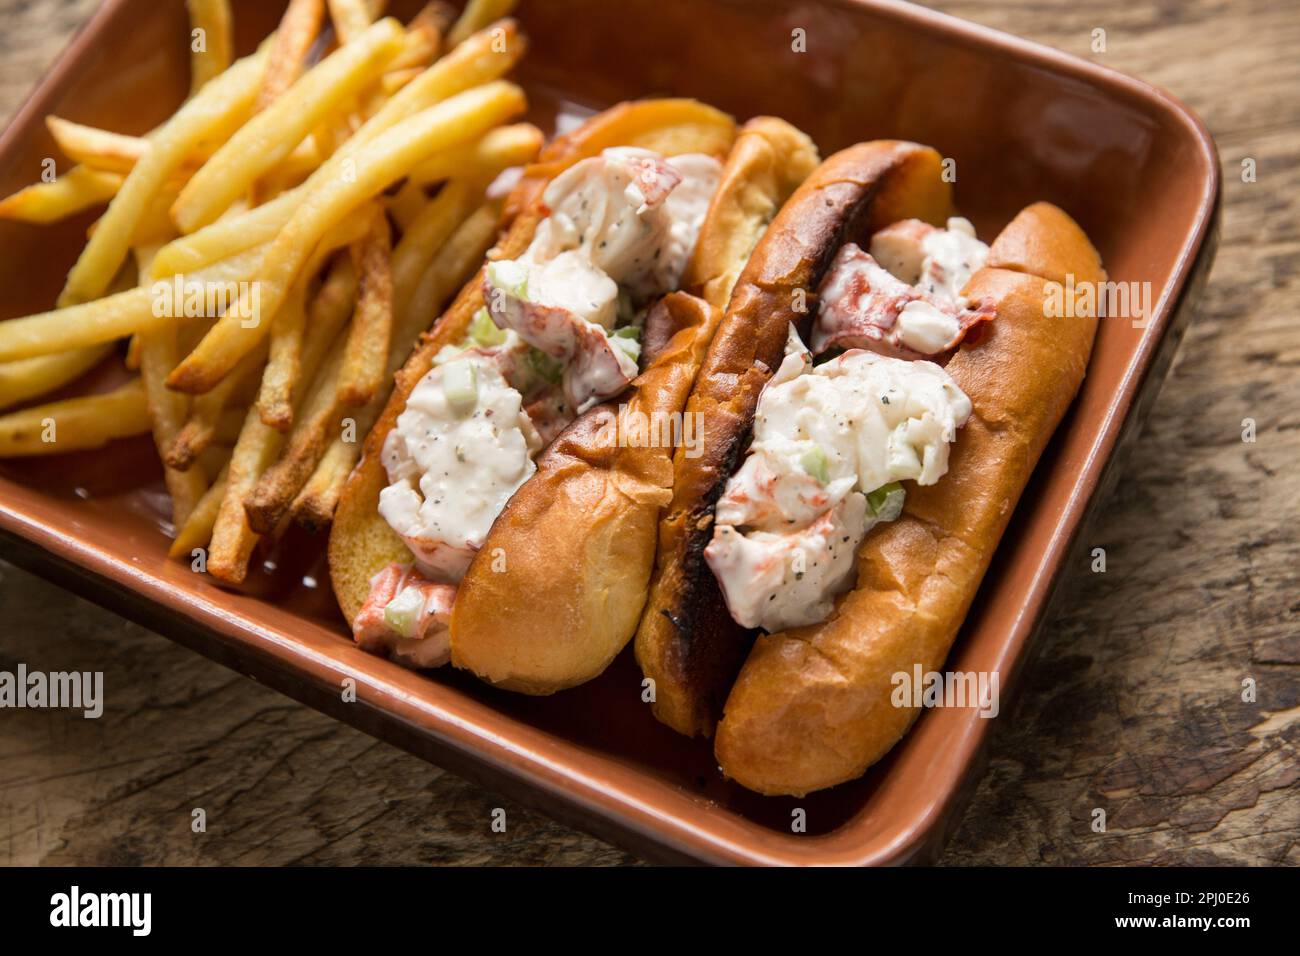 Lobster brioche rolls made with a boiled lobster, Homarus gammarus, caught in the English Channel. The lobster is combined with mayonnaise, diced cele Stock Photo